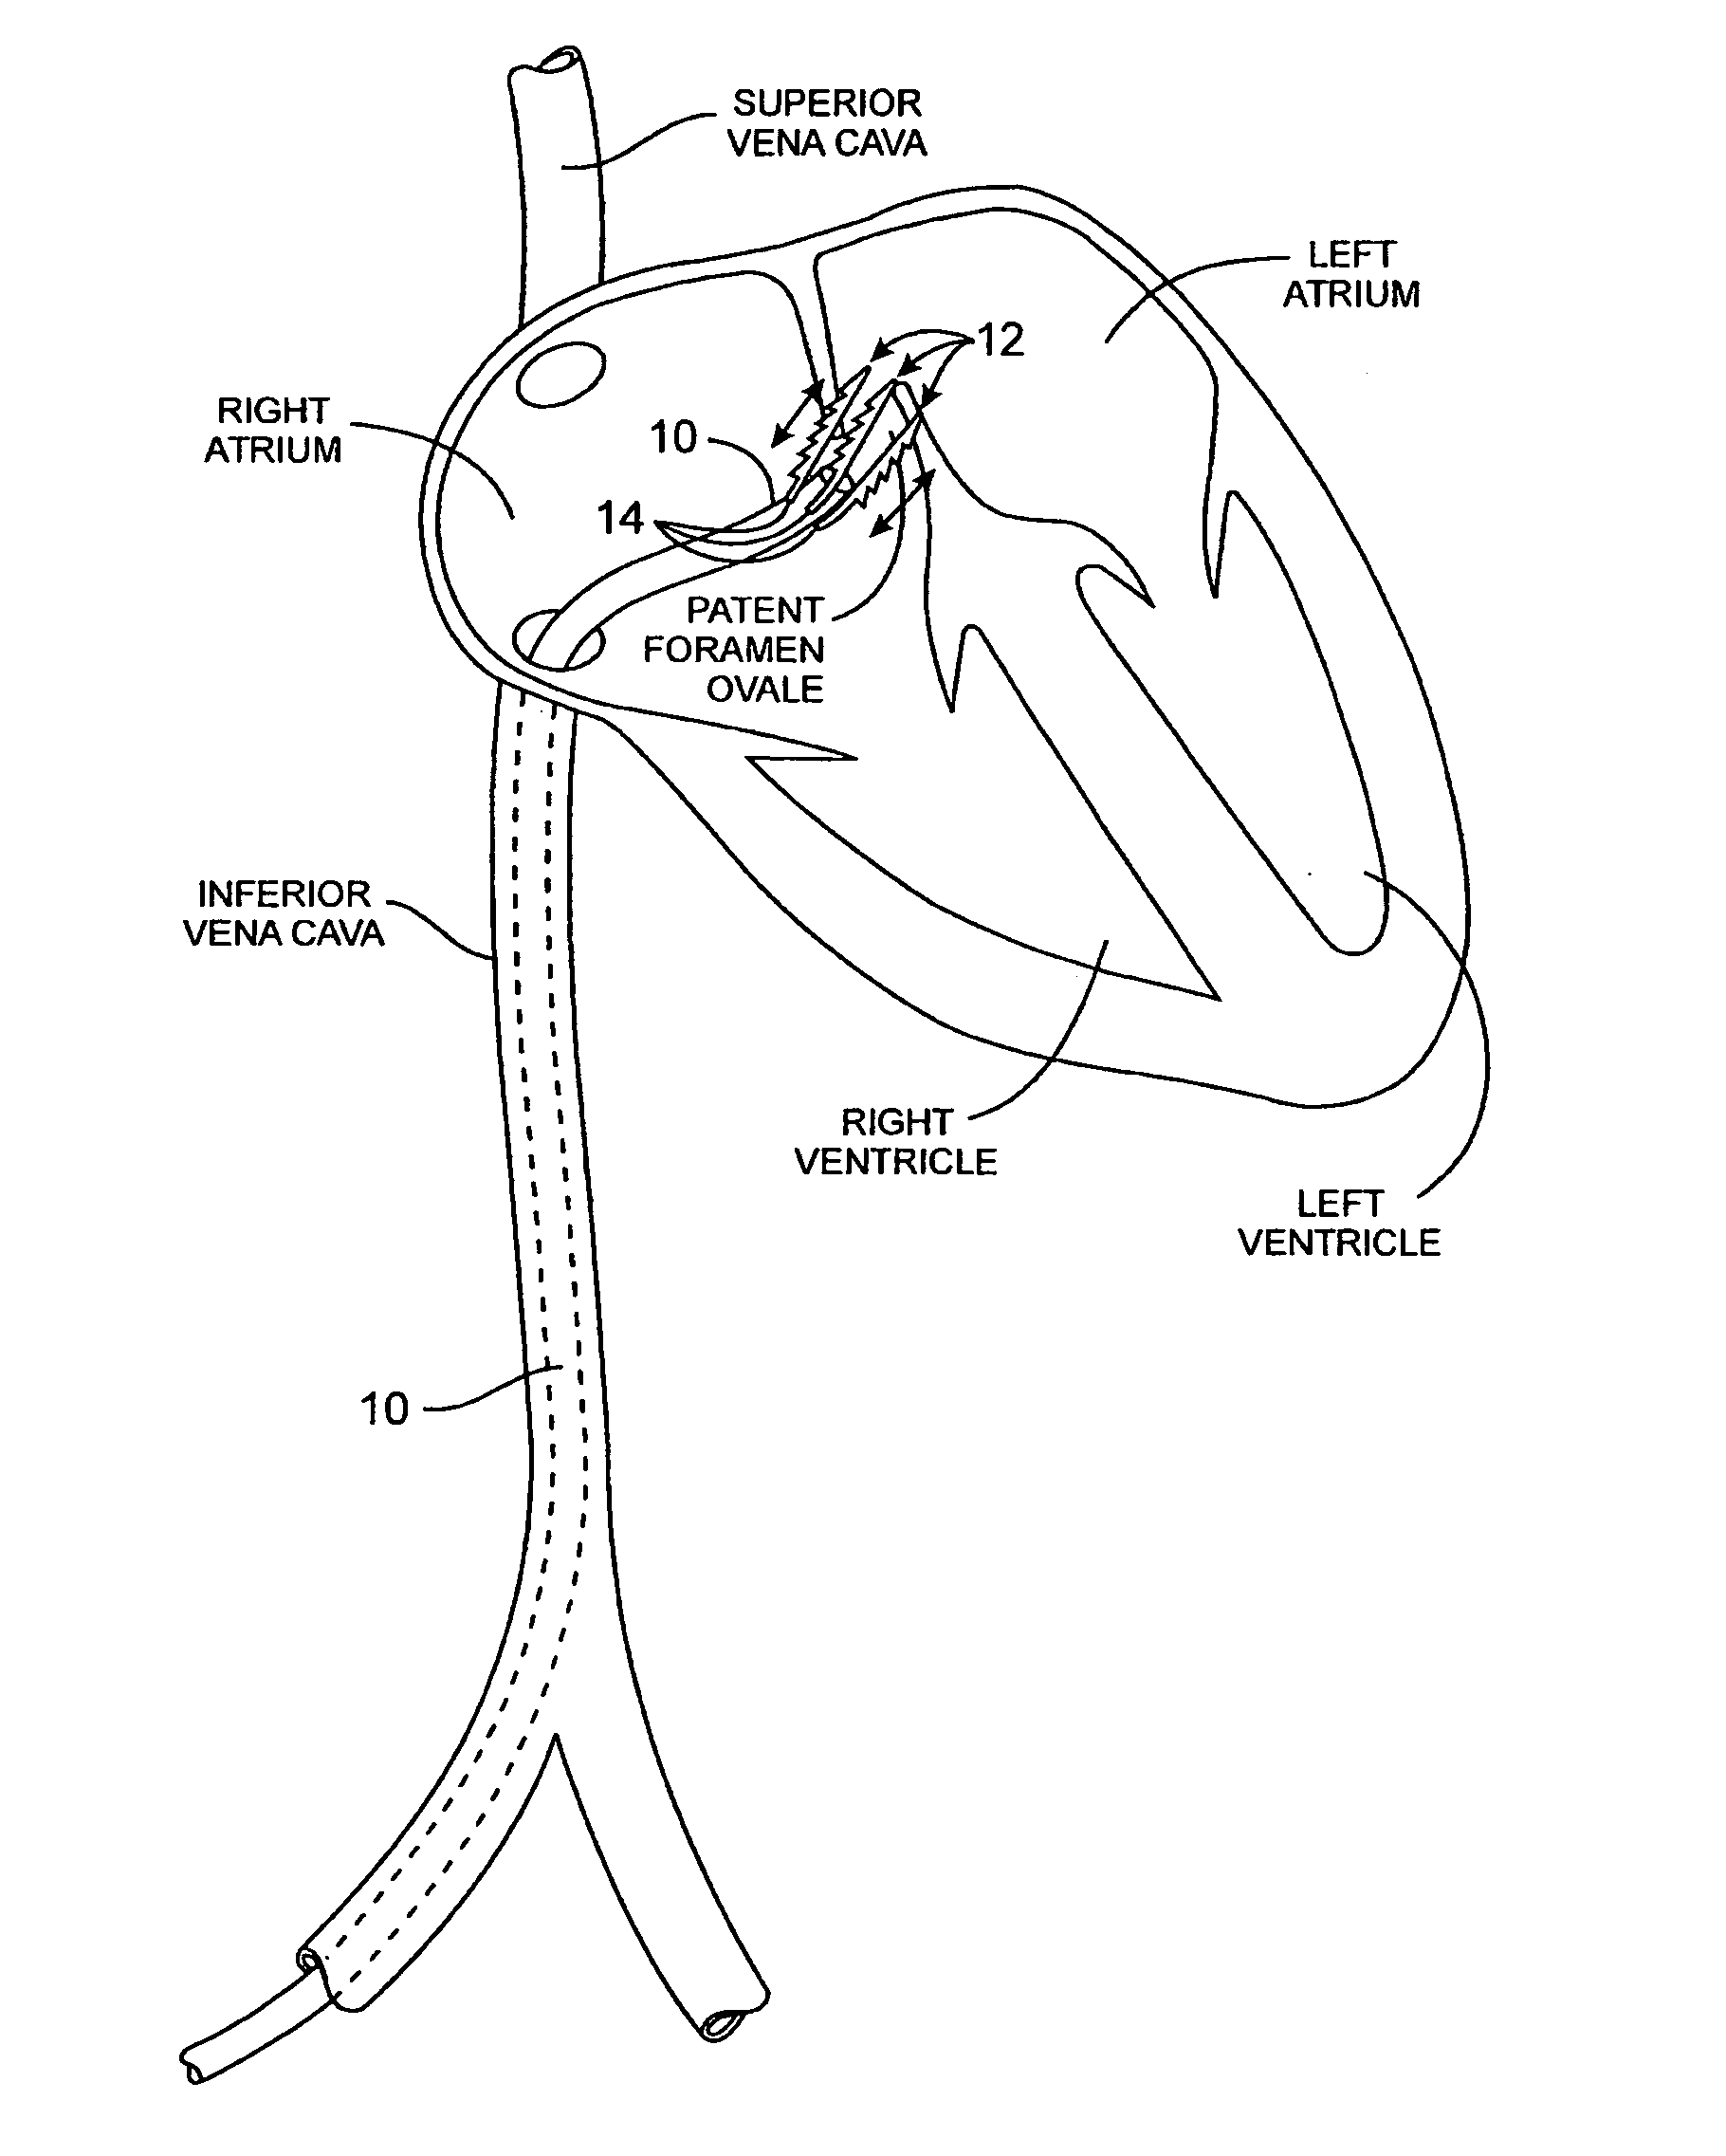 Methods and apparatus for treatment of patent foramen ovale